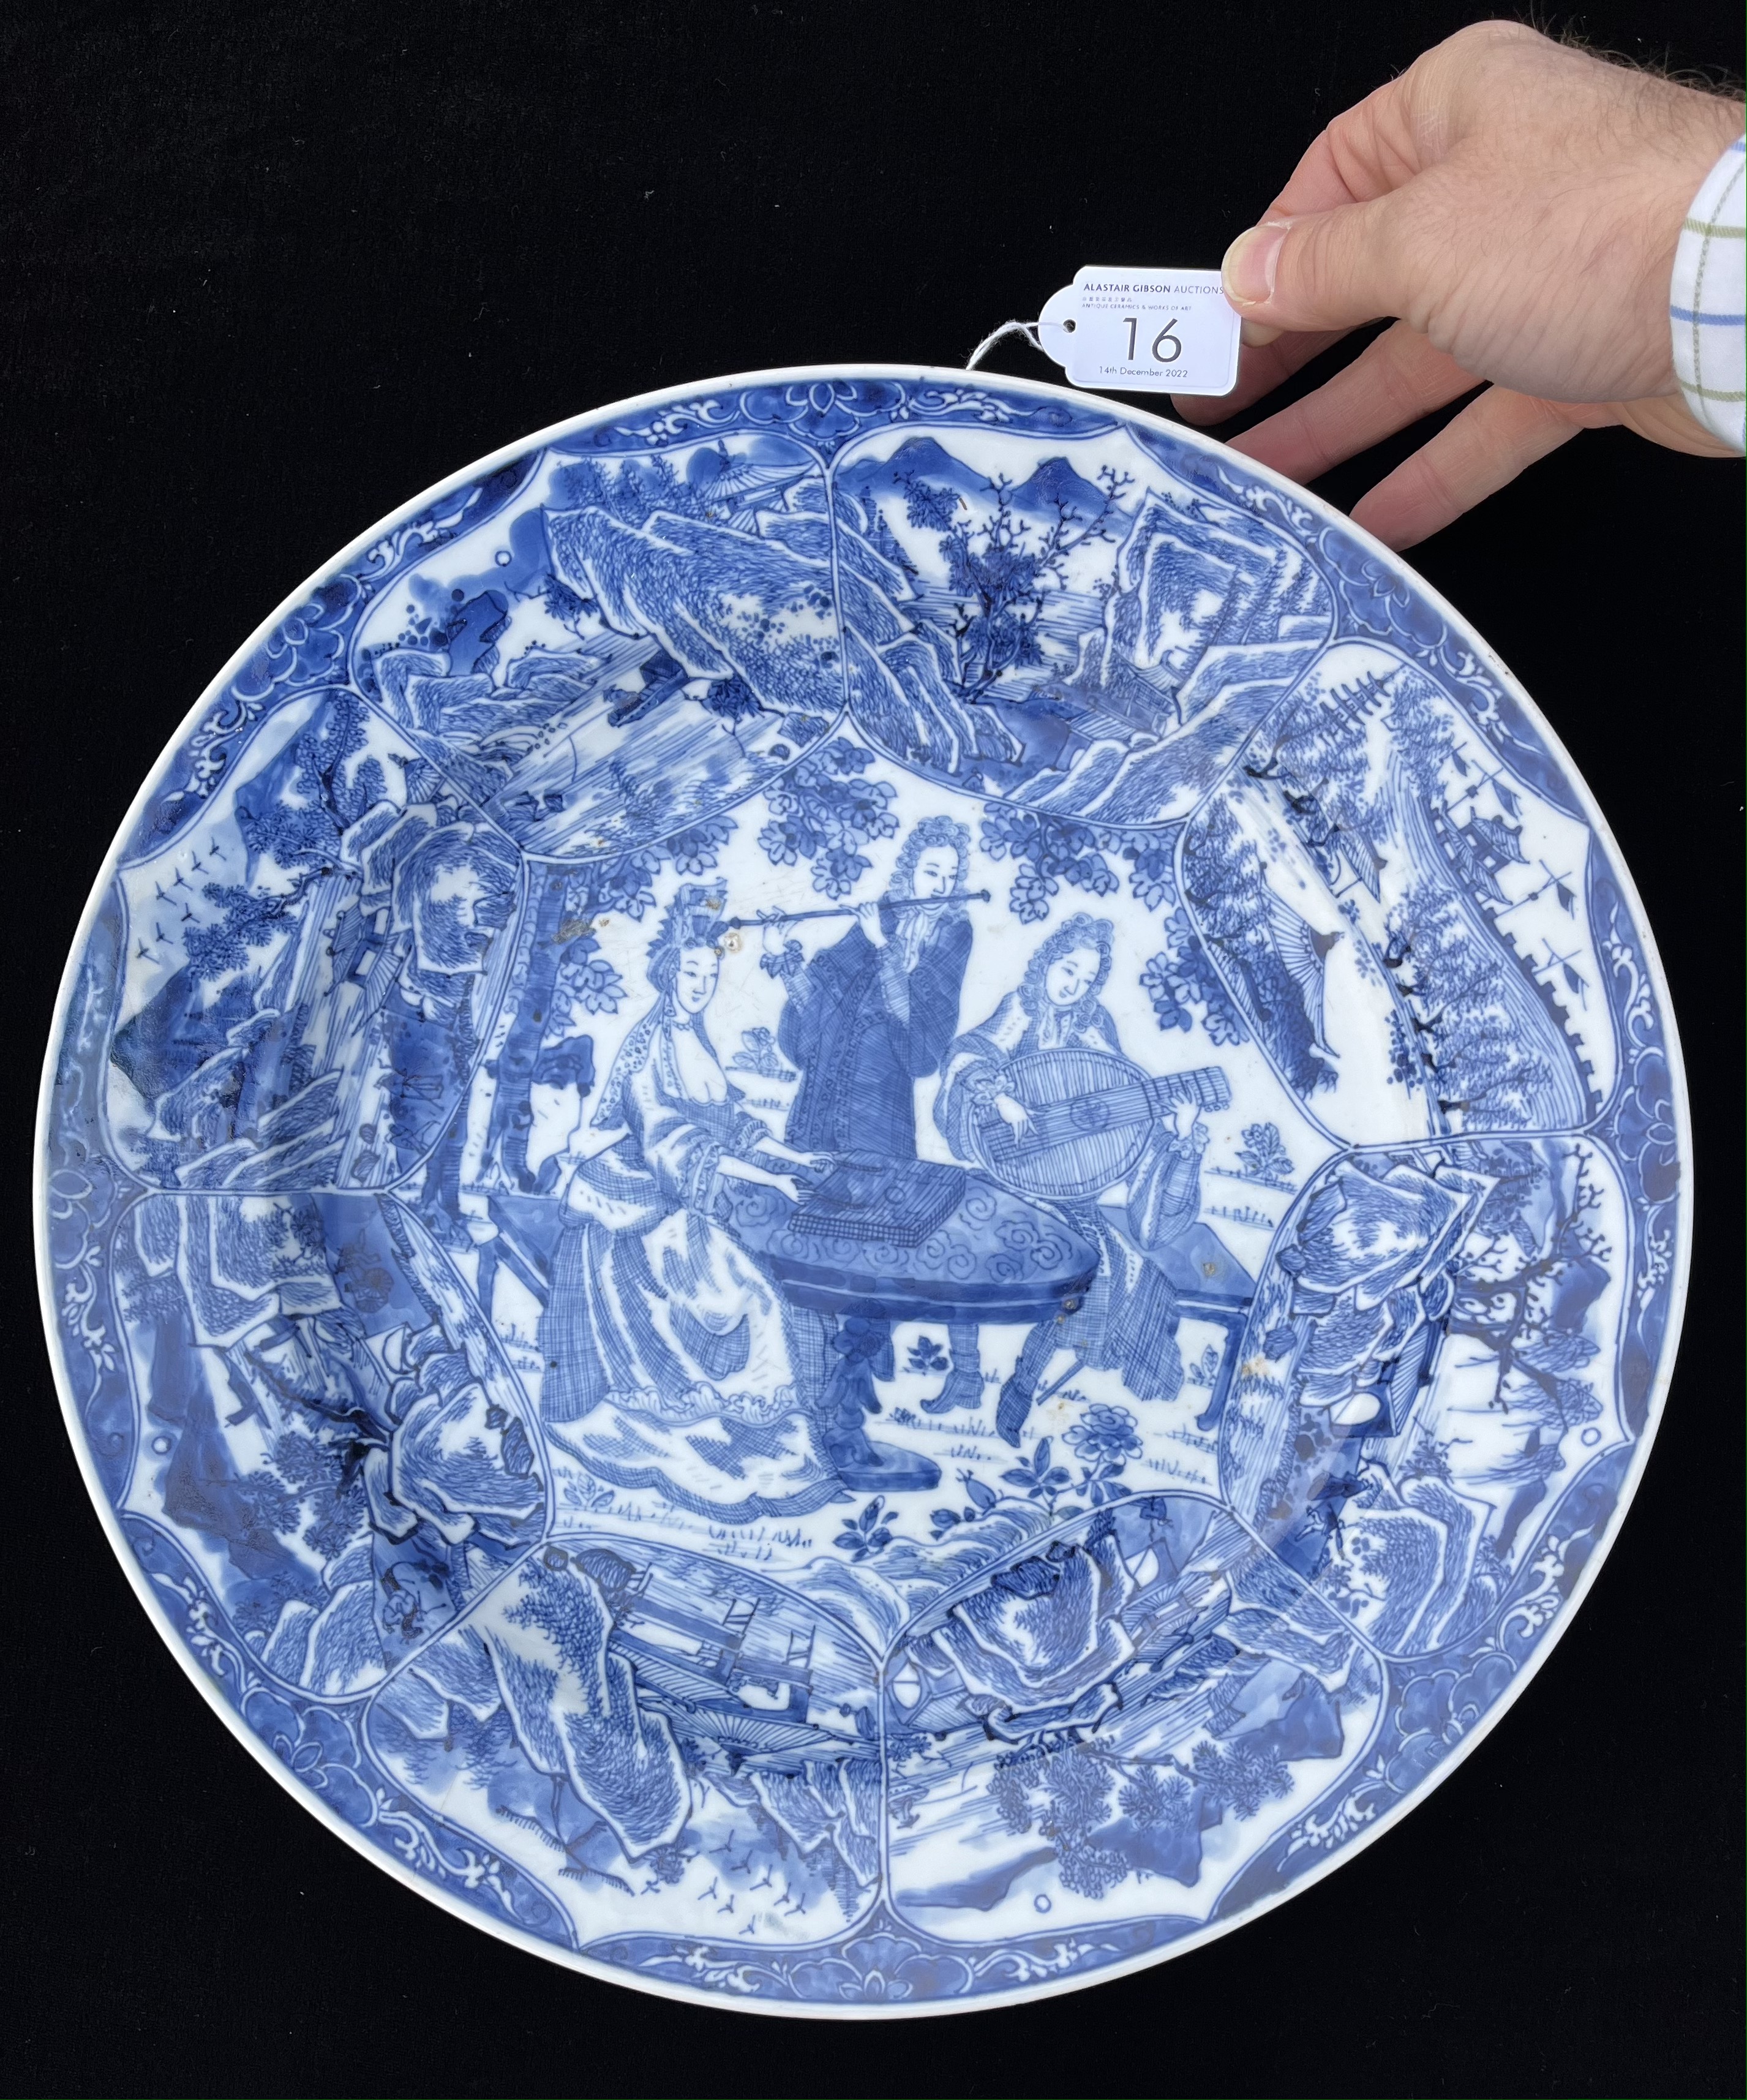 A CHINESE BLUE AND WHITE PORCELAIN ‘MUSICIANS' DISH, QING DYNASTY, KANGXI PERIOD, 1662 – 1722 - Image 2 of 11